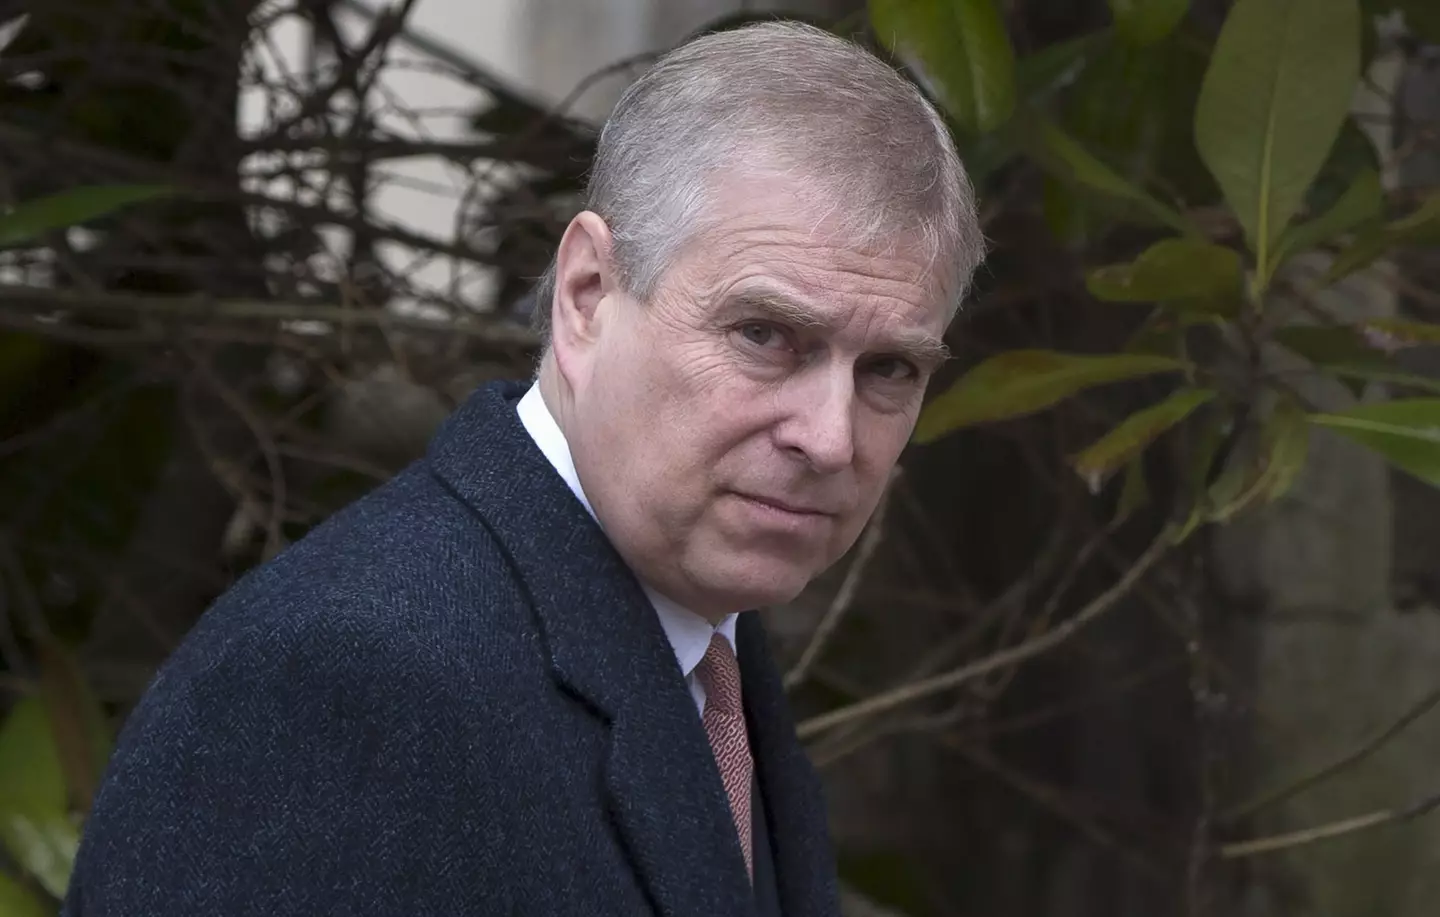 Prince Andrew settled out of court this week. (